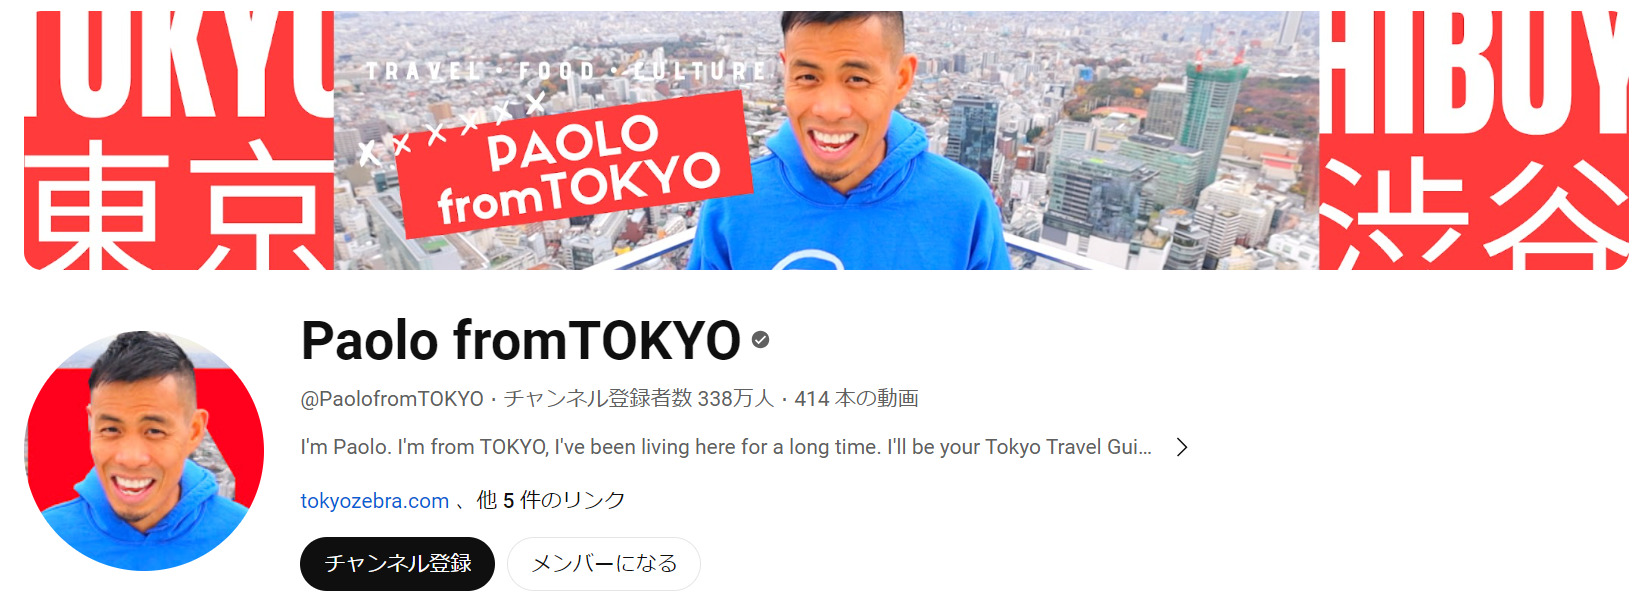 Paolo from TOKYO